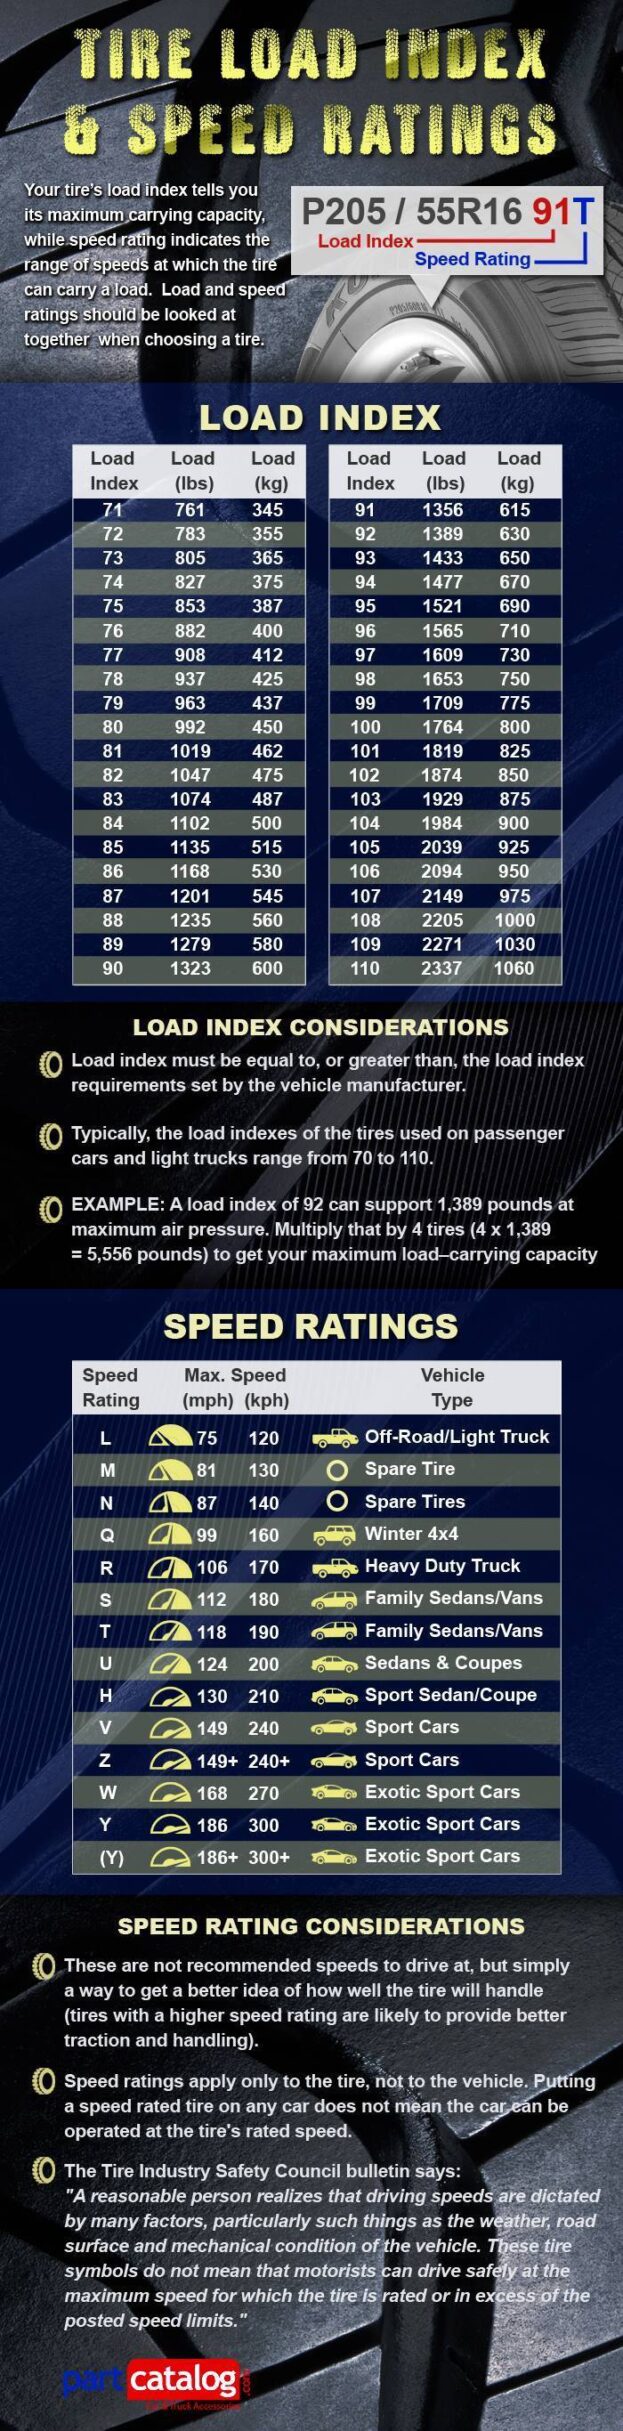 Tire Load and Speed Guide infographic